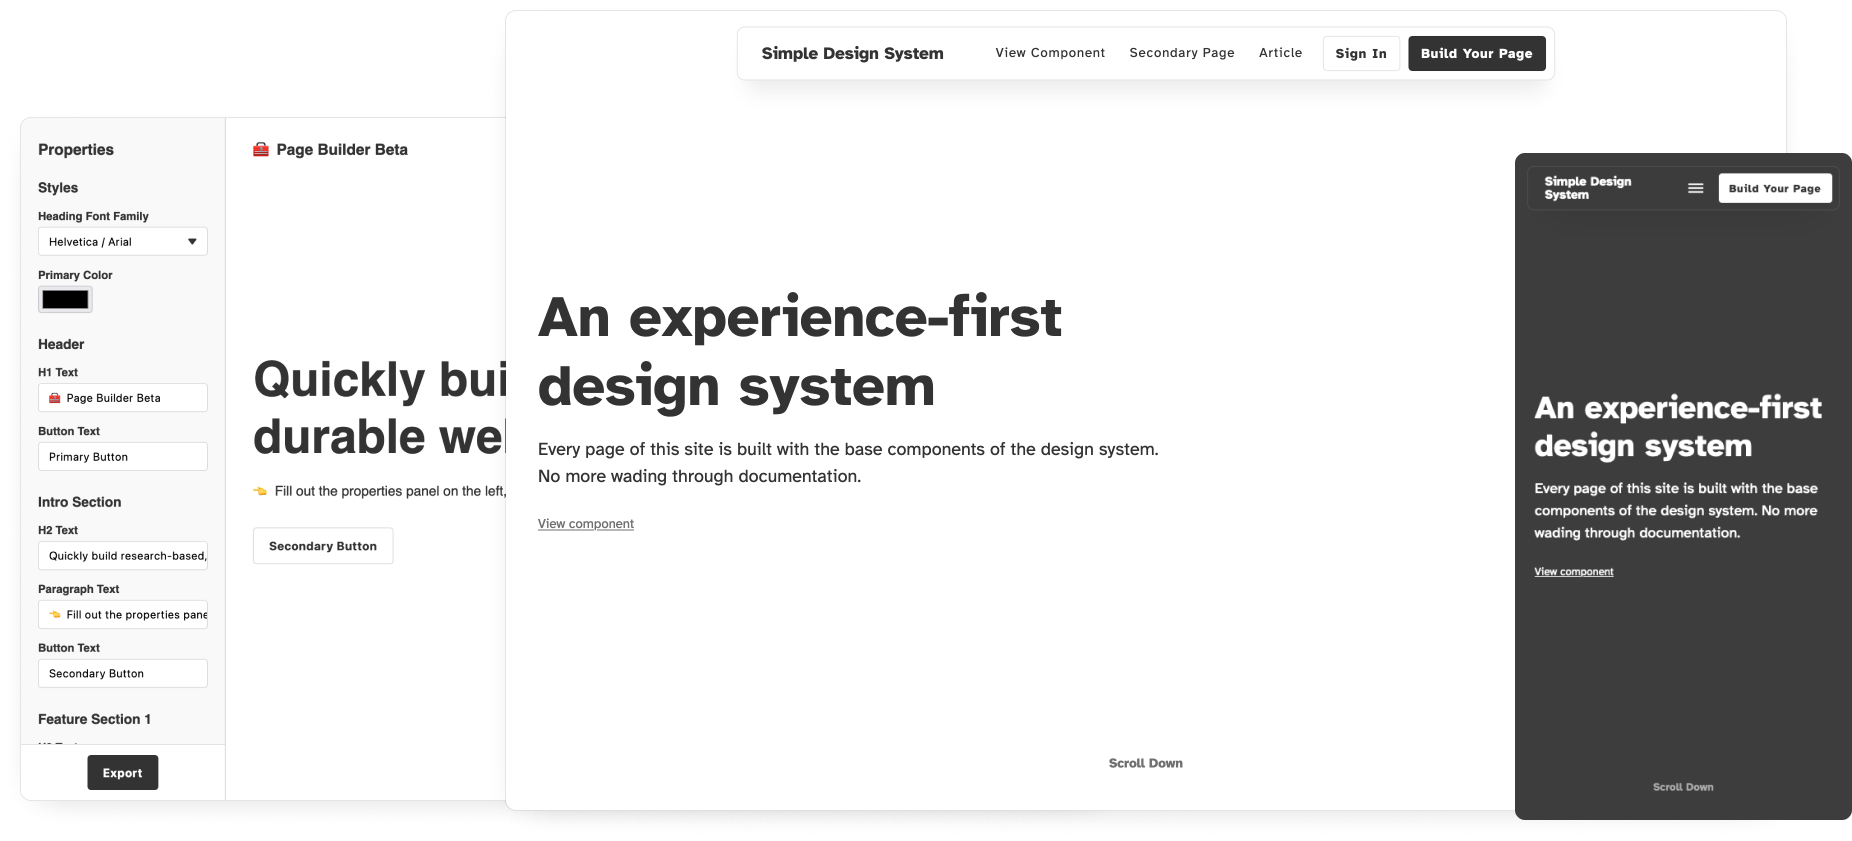 Cover image for the Design System with the homepage, and Page Builder.